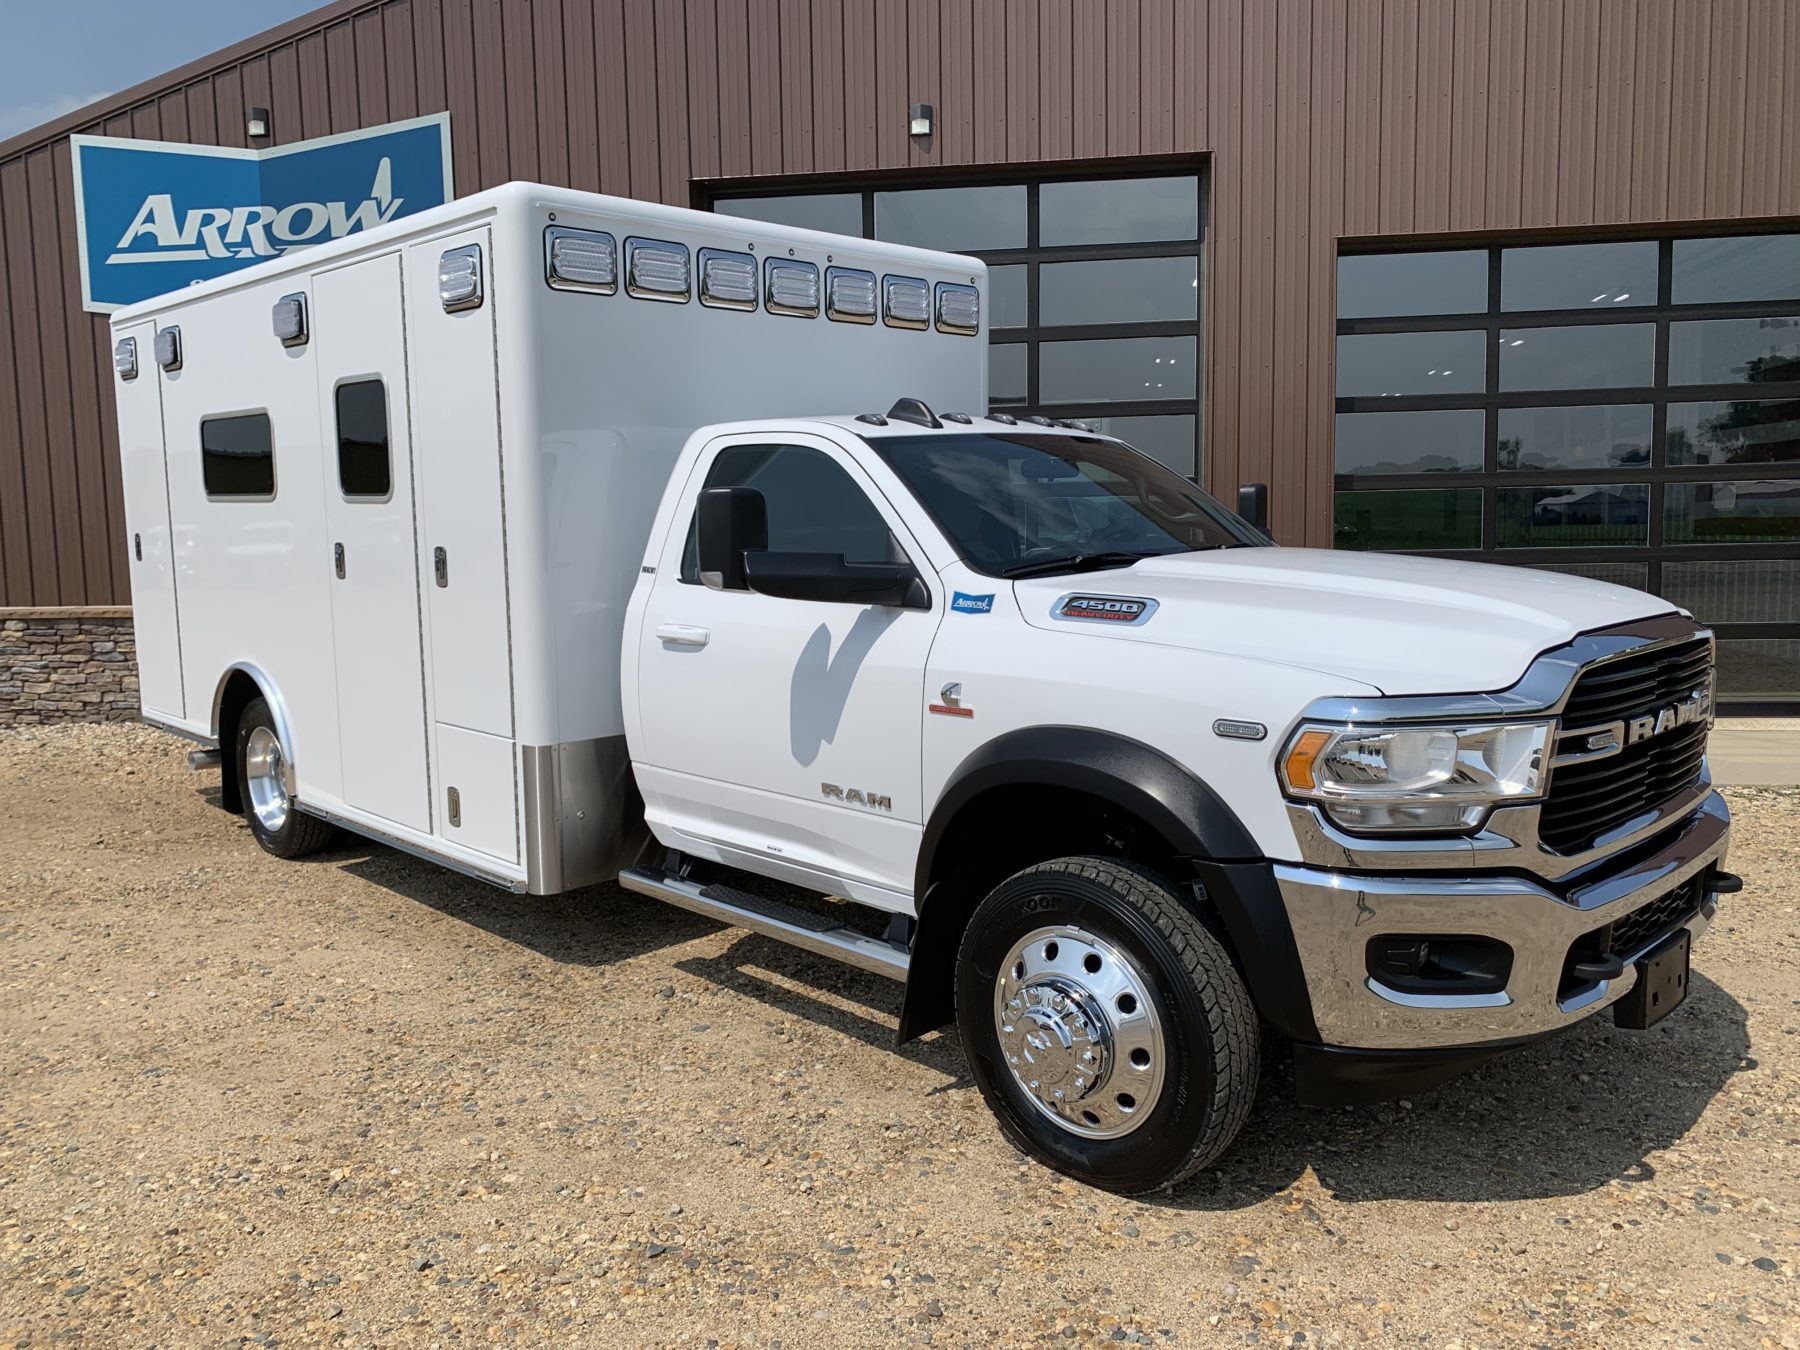 2021 Ram 4500 4x4 Heavy Duty Ambulance For Sale – Picture 11